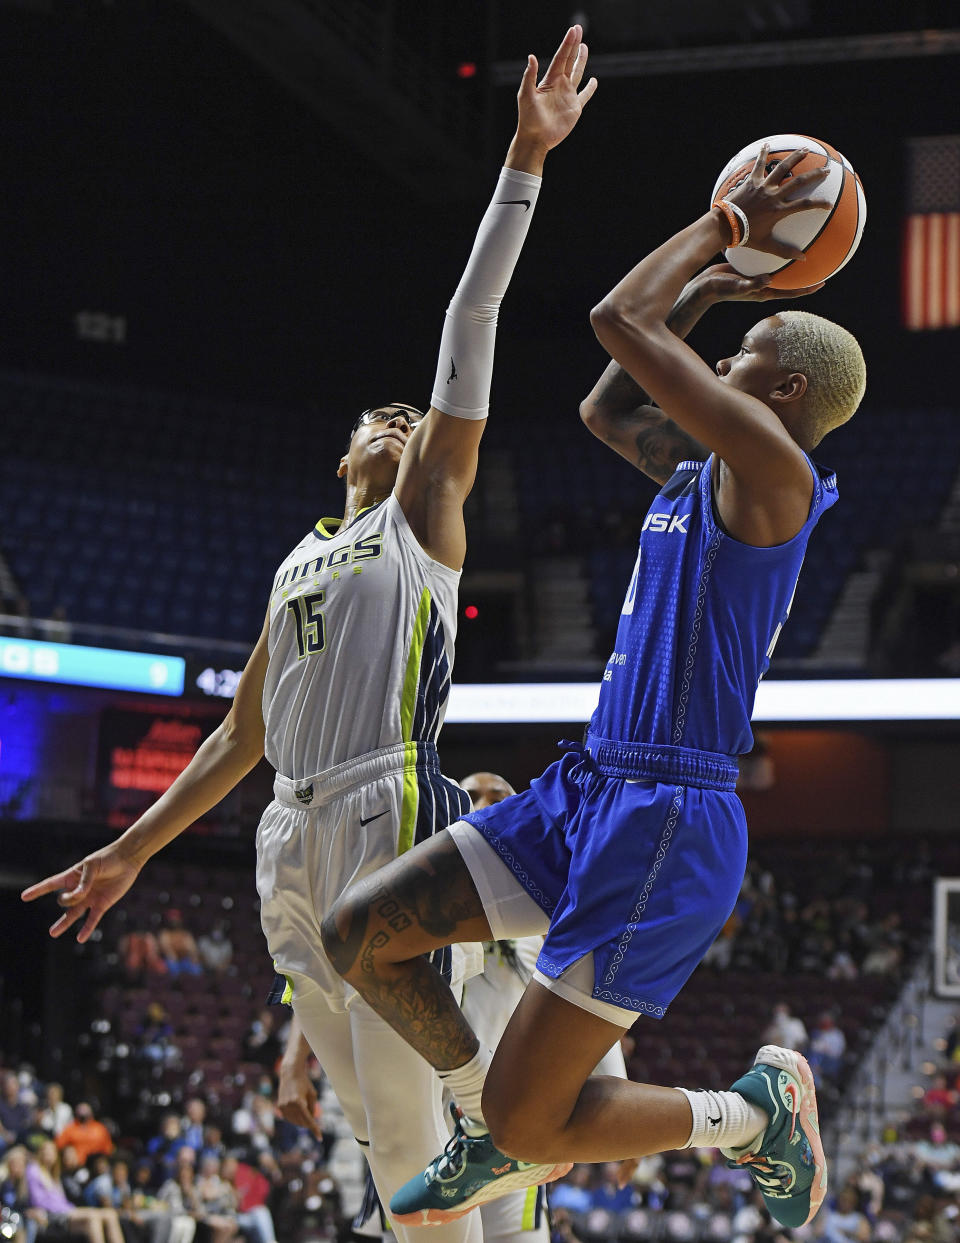 Connecticut Sun guard Courtney Williams (10) shoots over Dallas Wings guard Allisha Gray (15) during a WNBA basketball game Tuesday, May 24, 2022, in Uncasville, Conn. (Sean D. Elliot/The Day via AP)